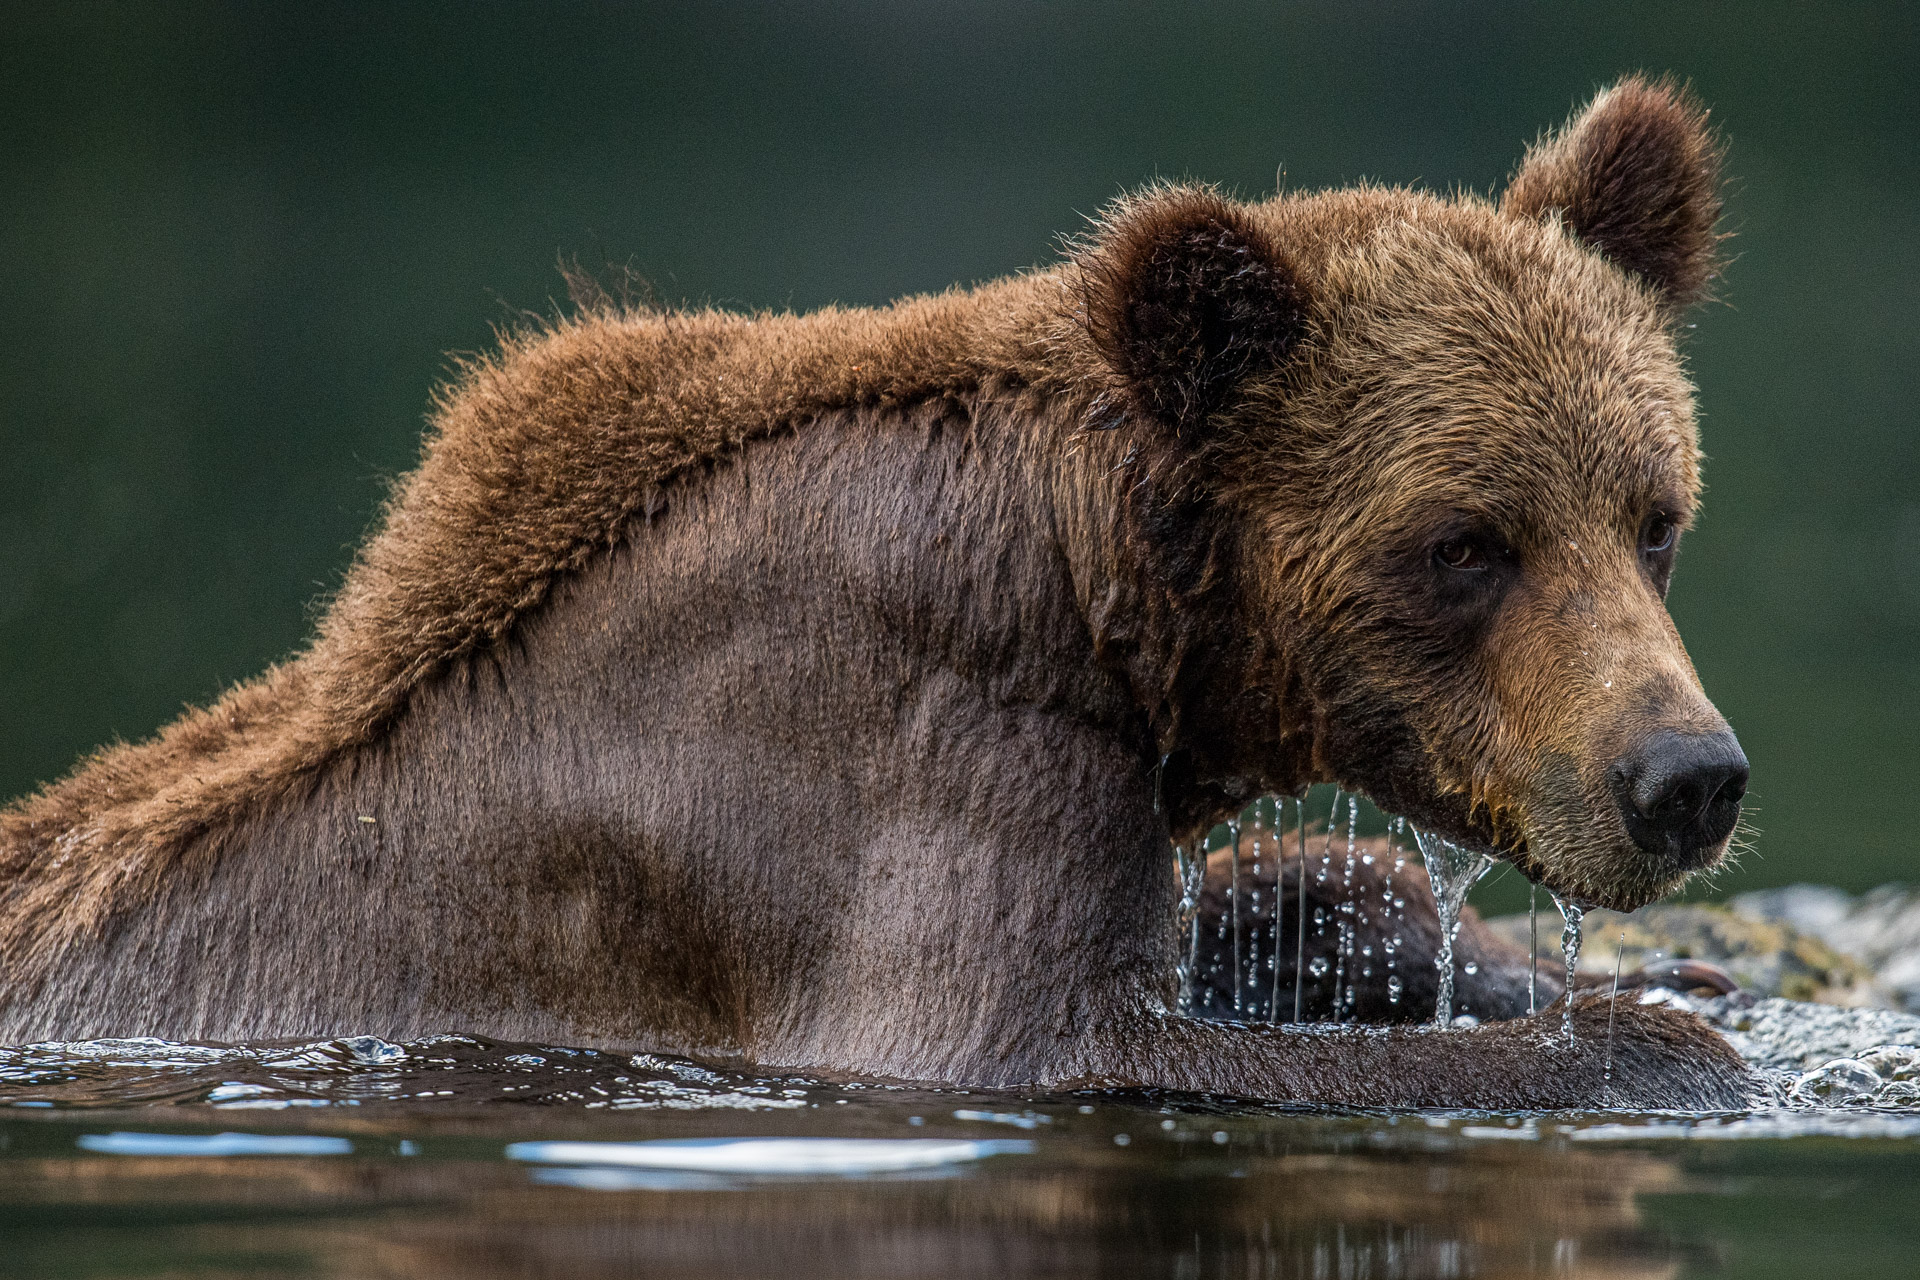 A sub-adult Grizzly Bear, Ursus arctos, emerges from water in Canada’s first and only grizzly sanctuary, the Khutzeymateen Provincial Park, or K’tzim-a-deen Grizzly Bear Sanctuary.